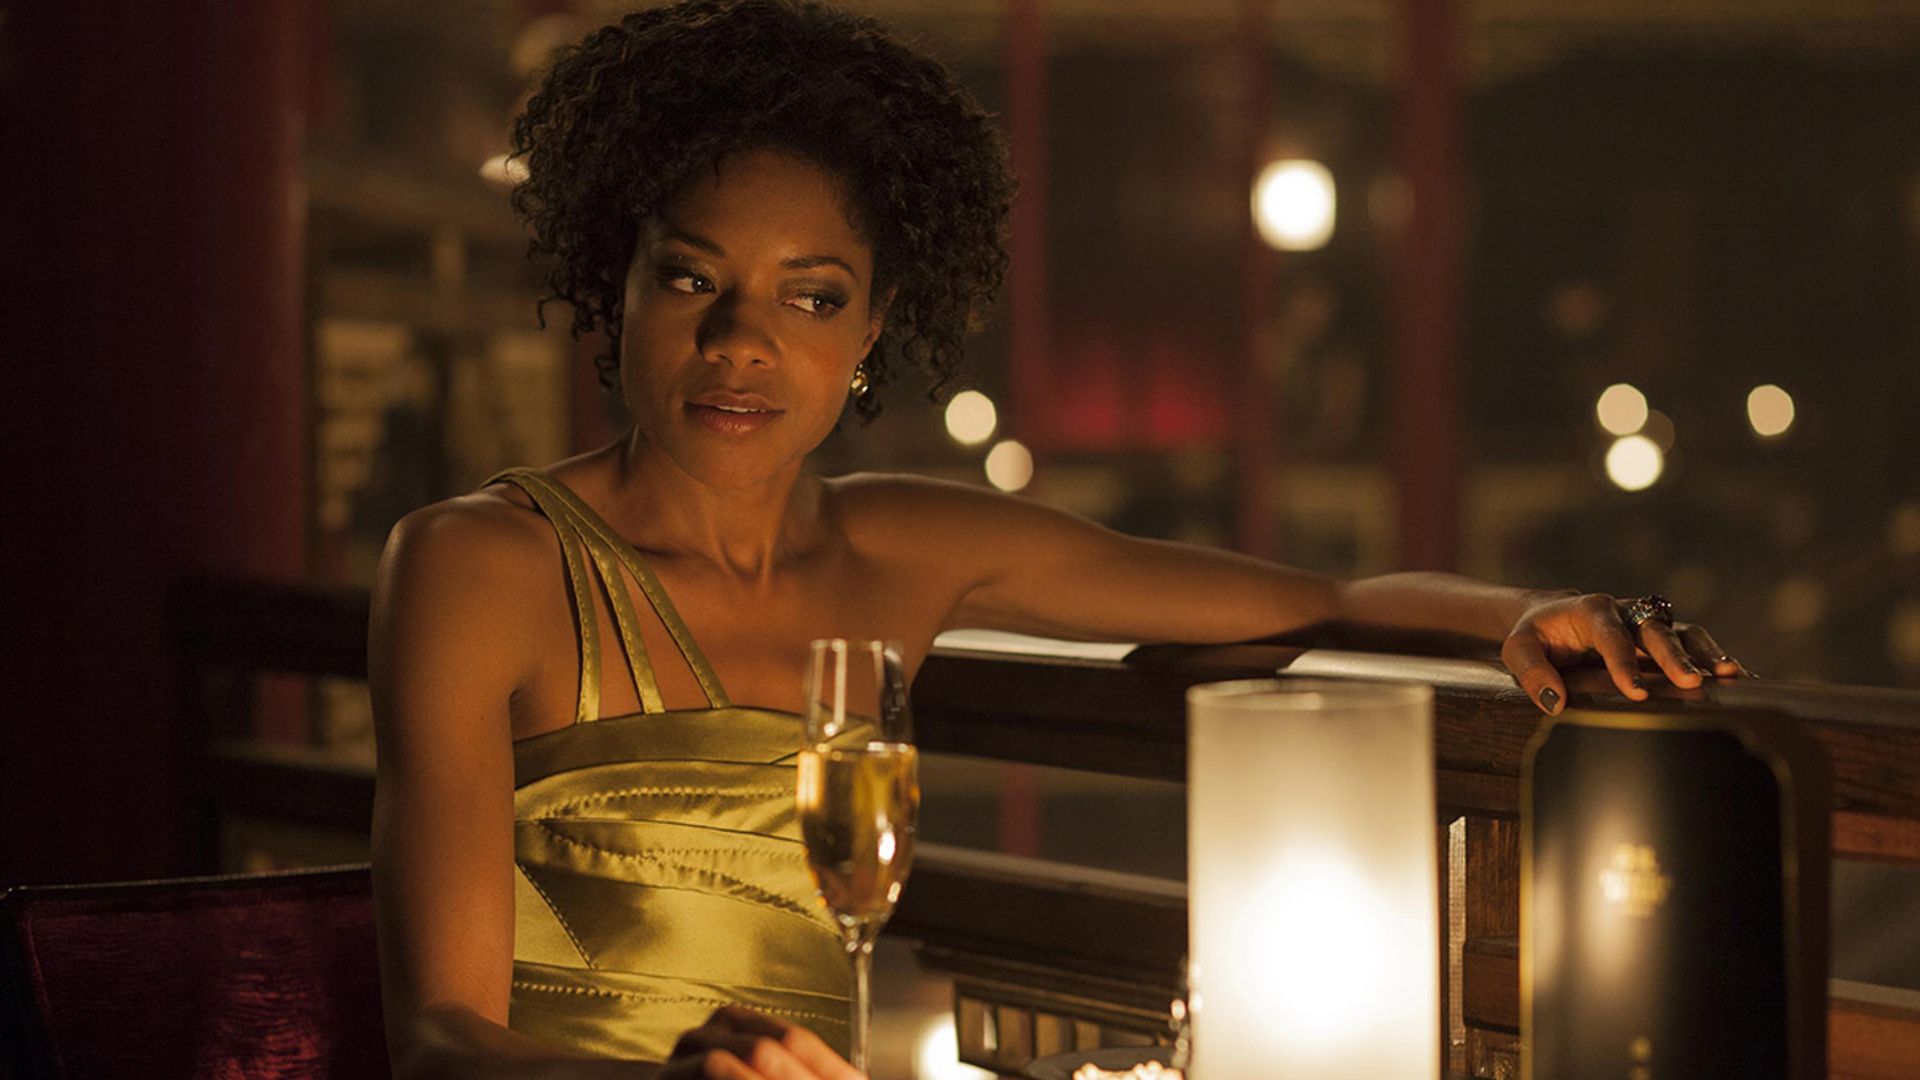 James Bond star Naomie Harris reveals why she almost didn't play Moneypenny